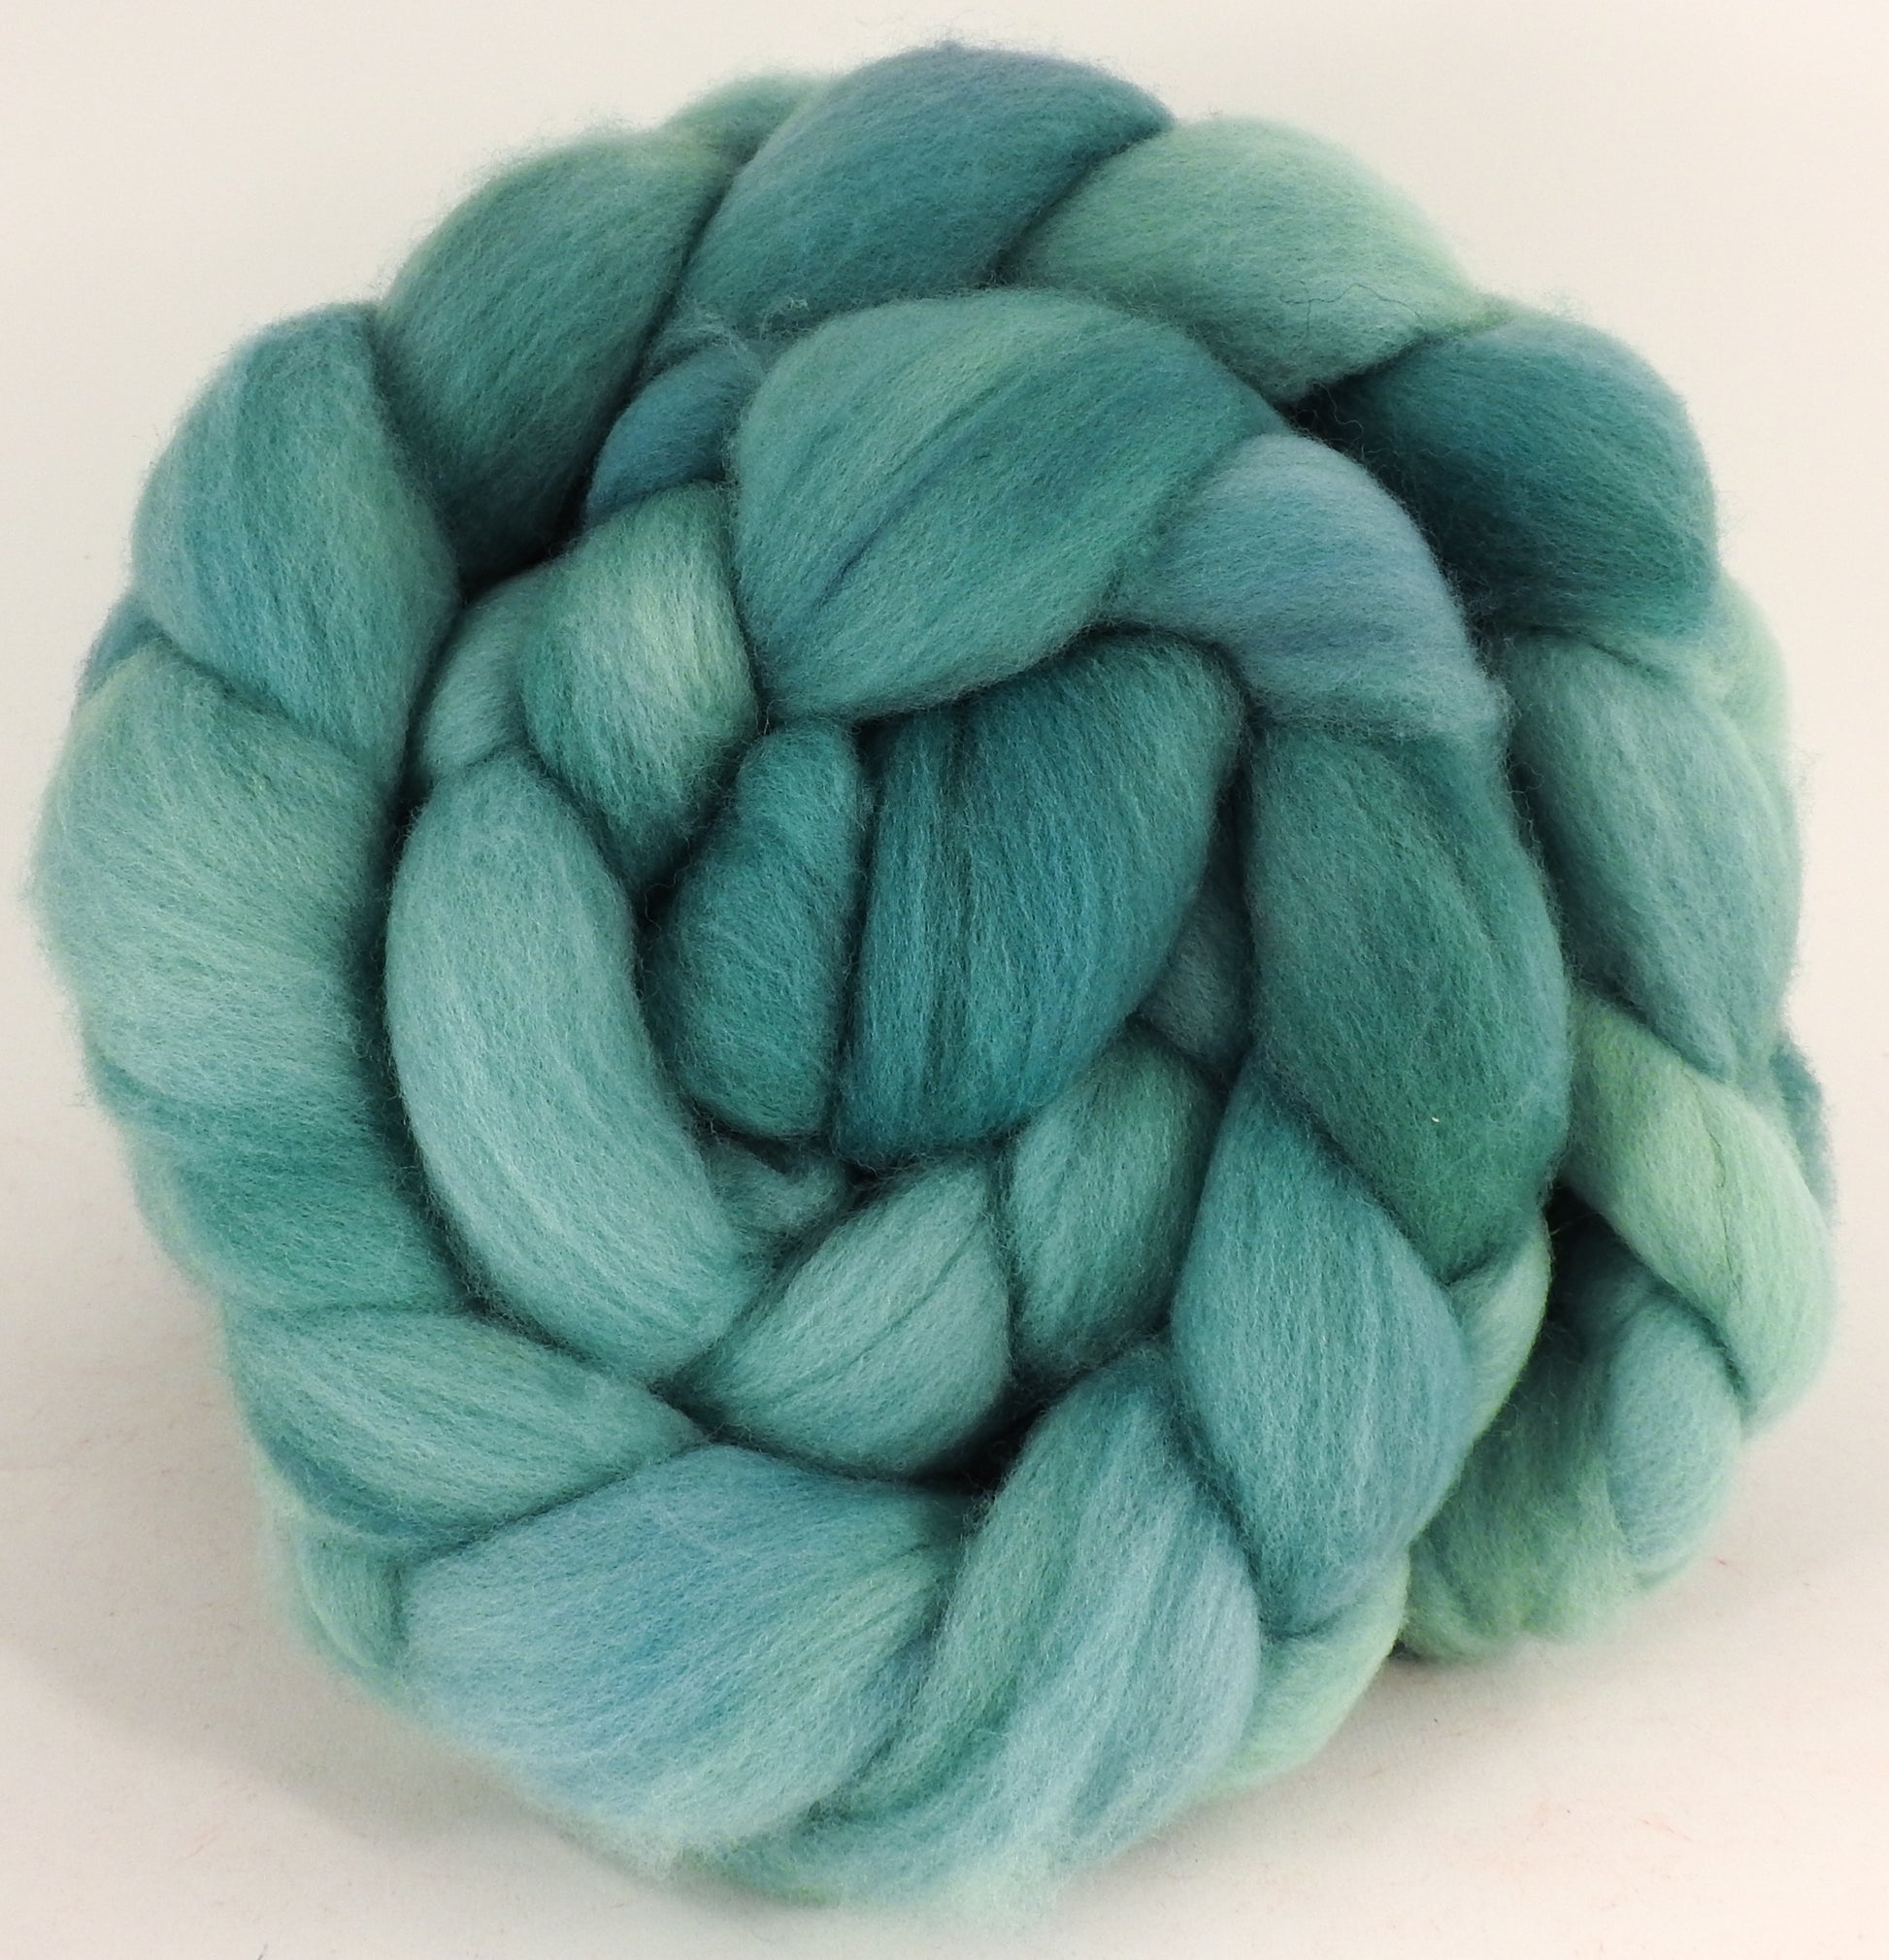 Hand dyed top for spinning - Spearmint - Organic Polwarth - Inglenook Fibers